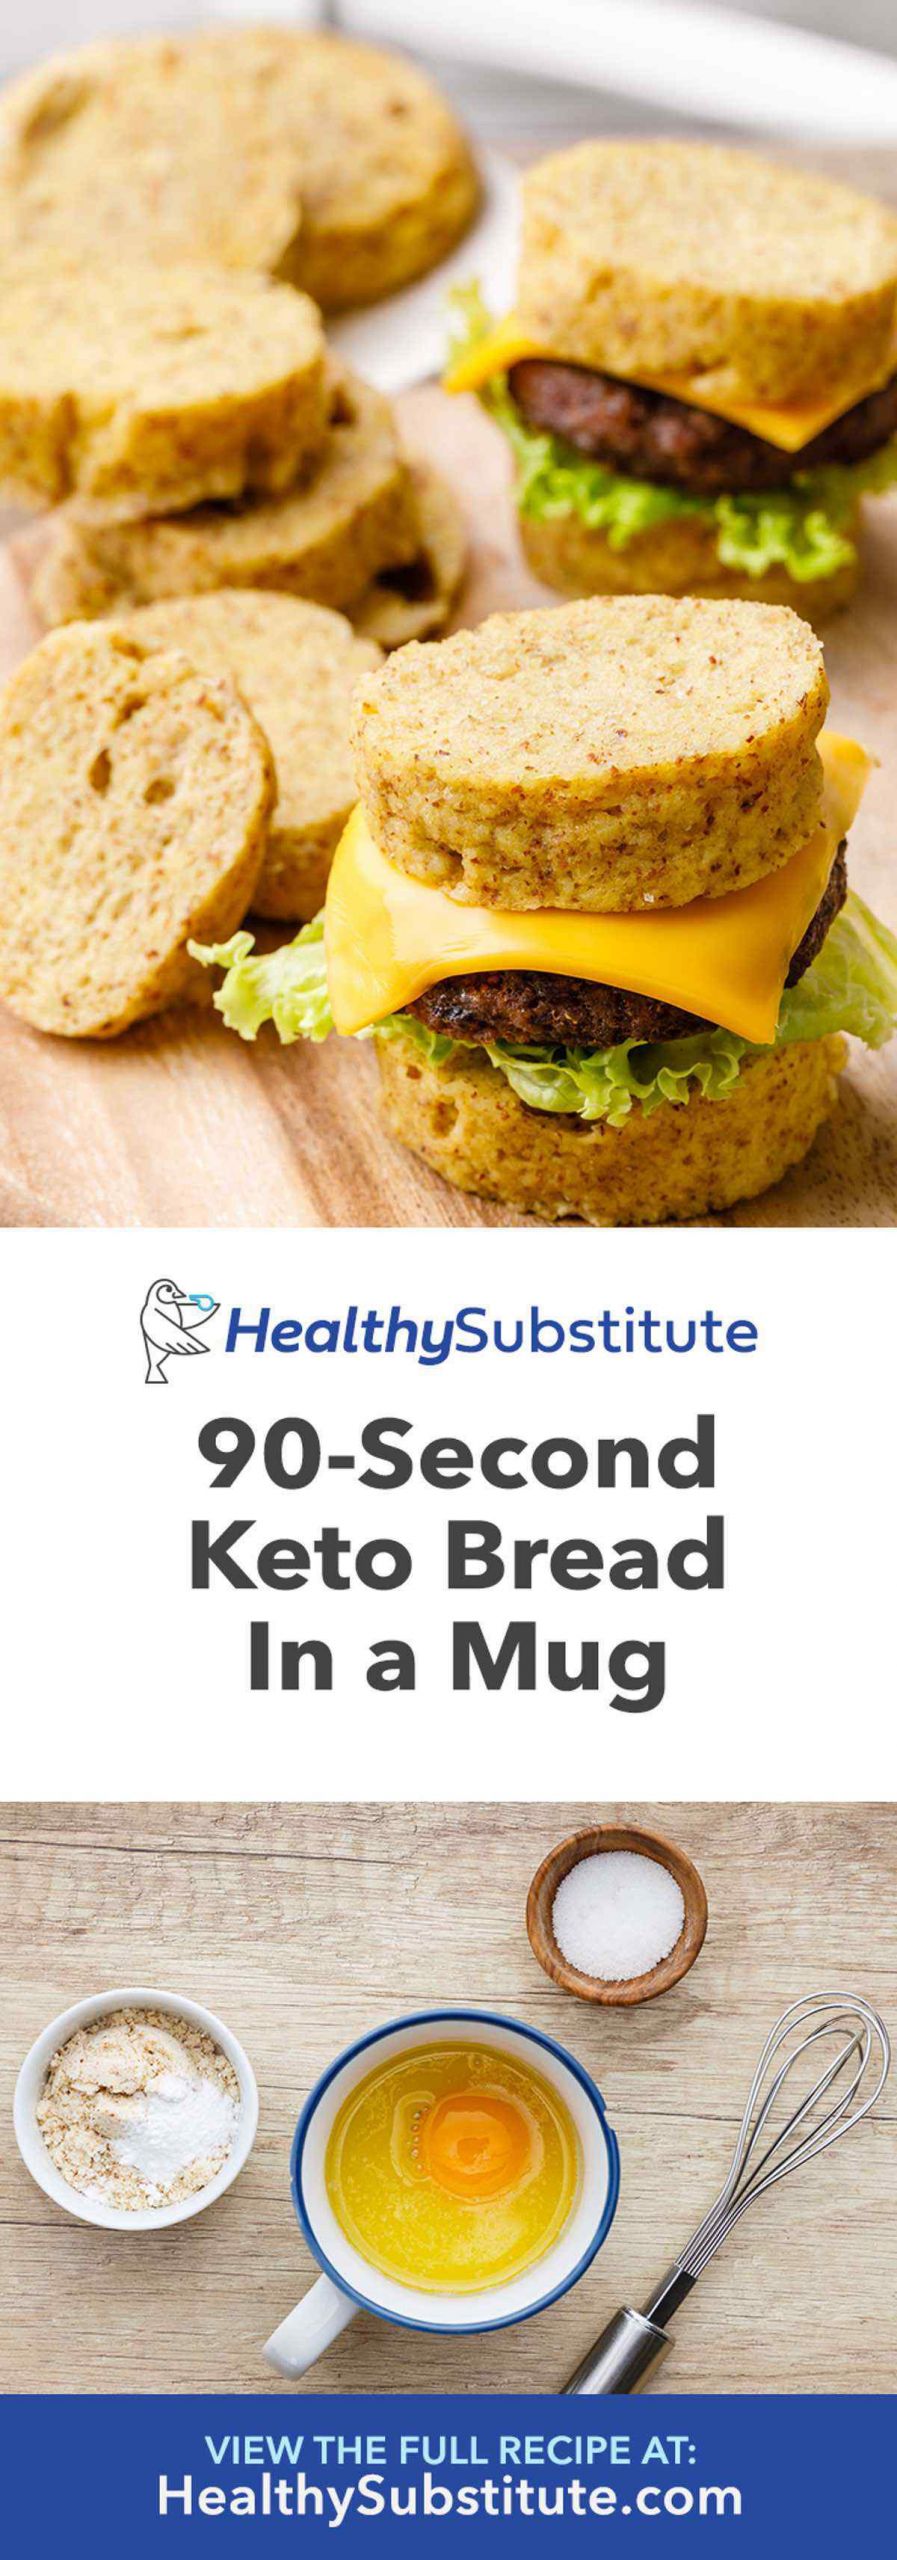 90 Second Keto Bread In A Mug
 The Best 90 Second Keto Bread in a Mug Quick and Easy